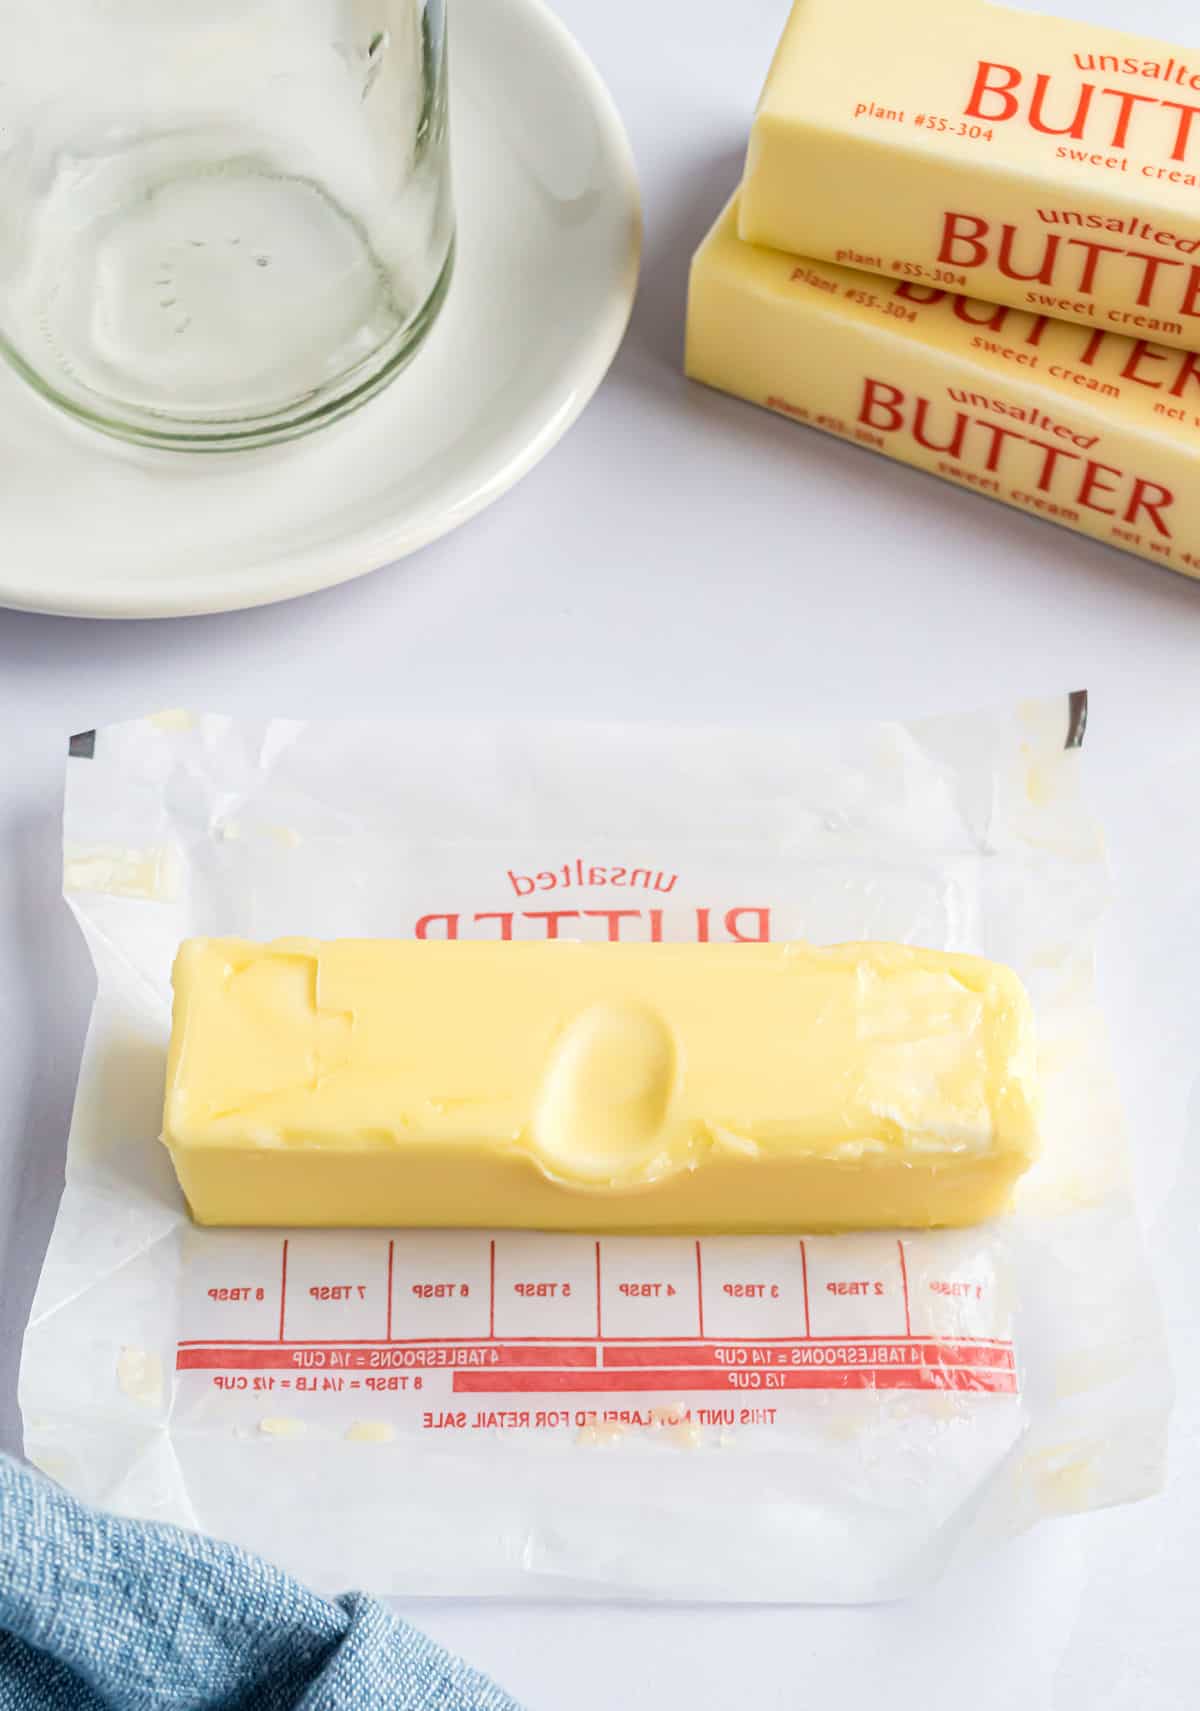 Stick of butter unwrapped with an indentation to show it's been softened.